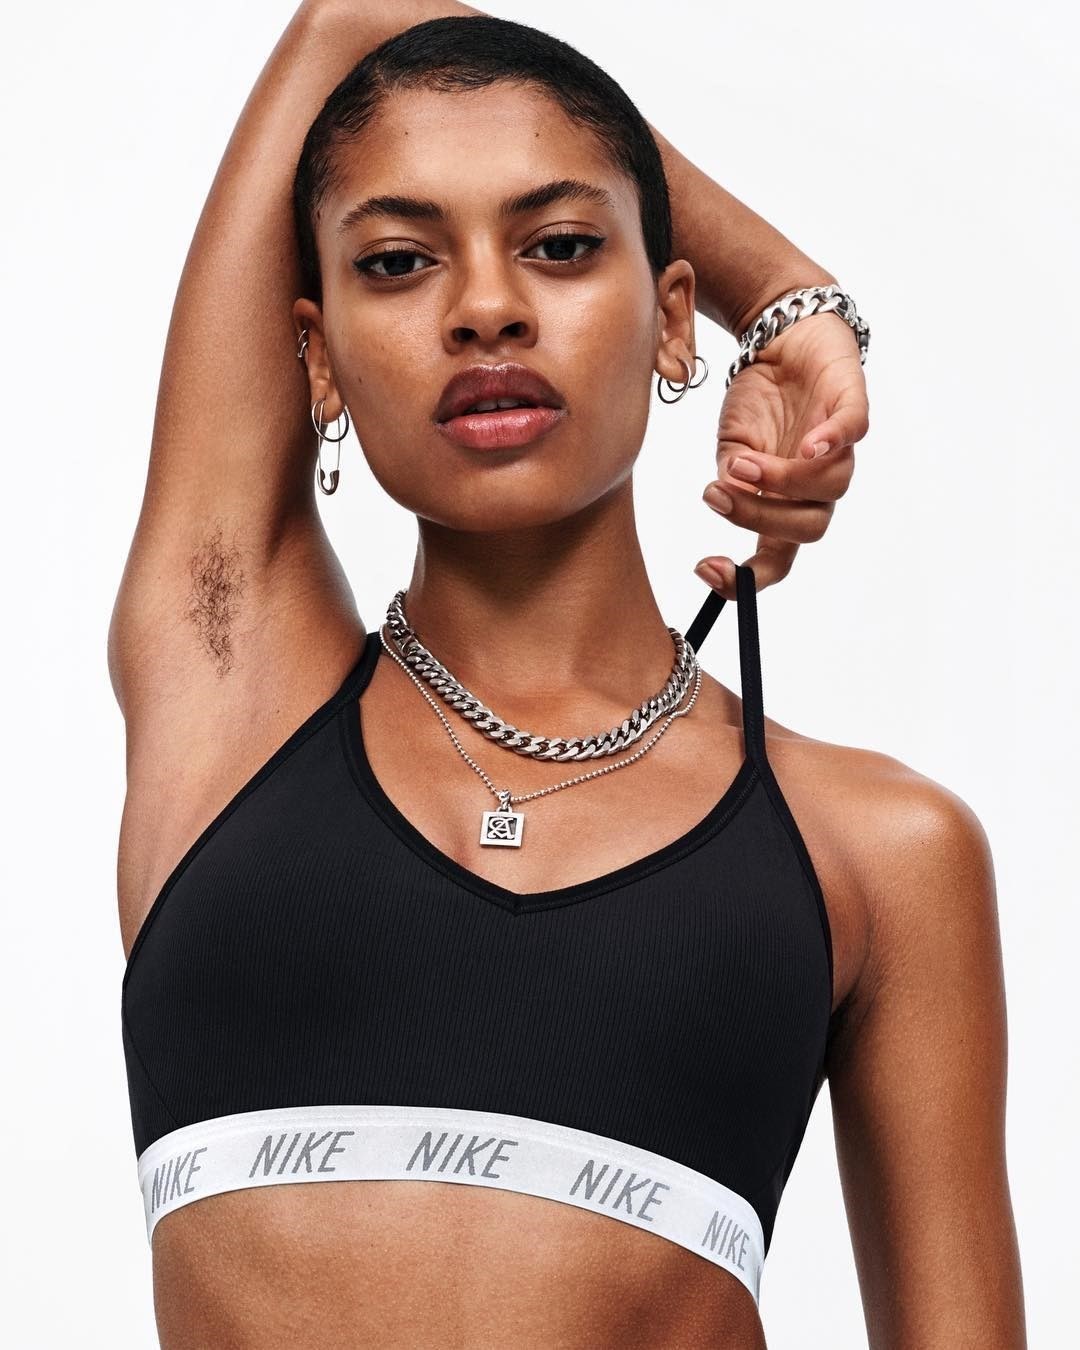 Nike ad featuring woman with unshaven armpits gets prickly response